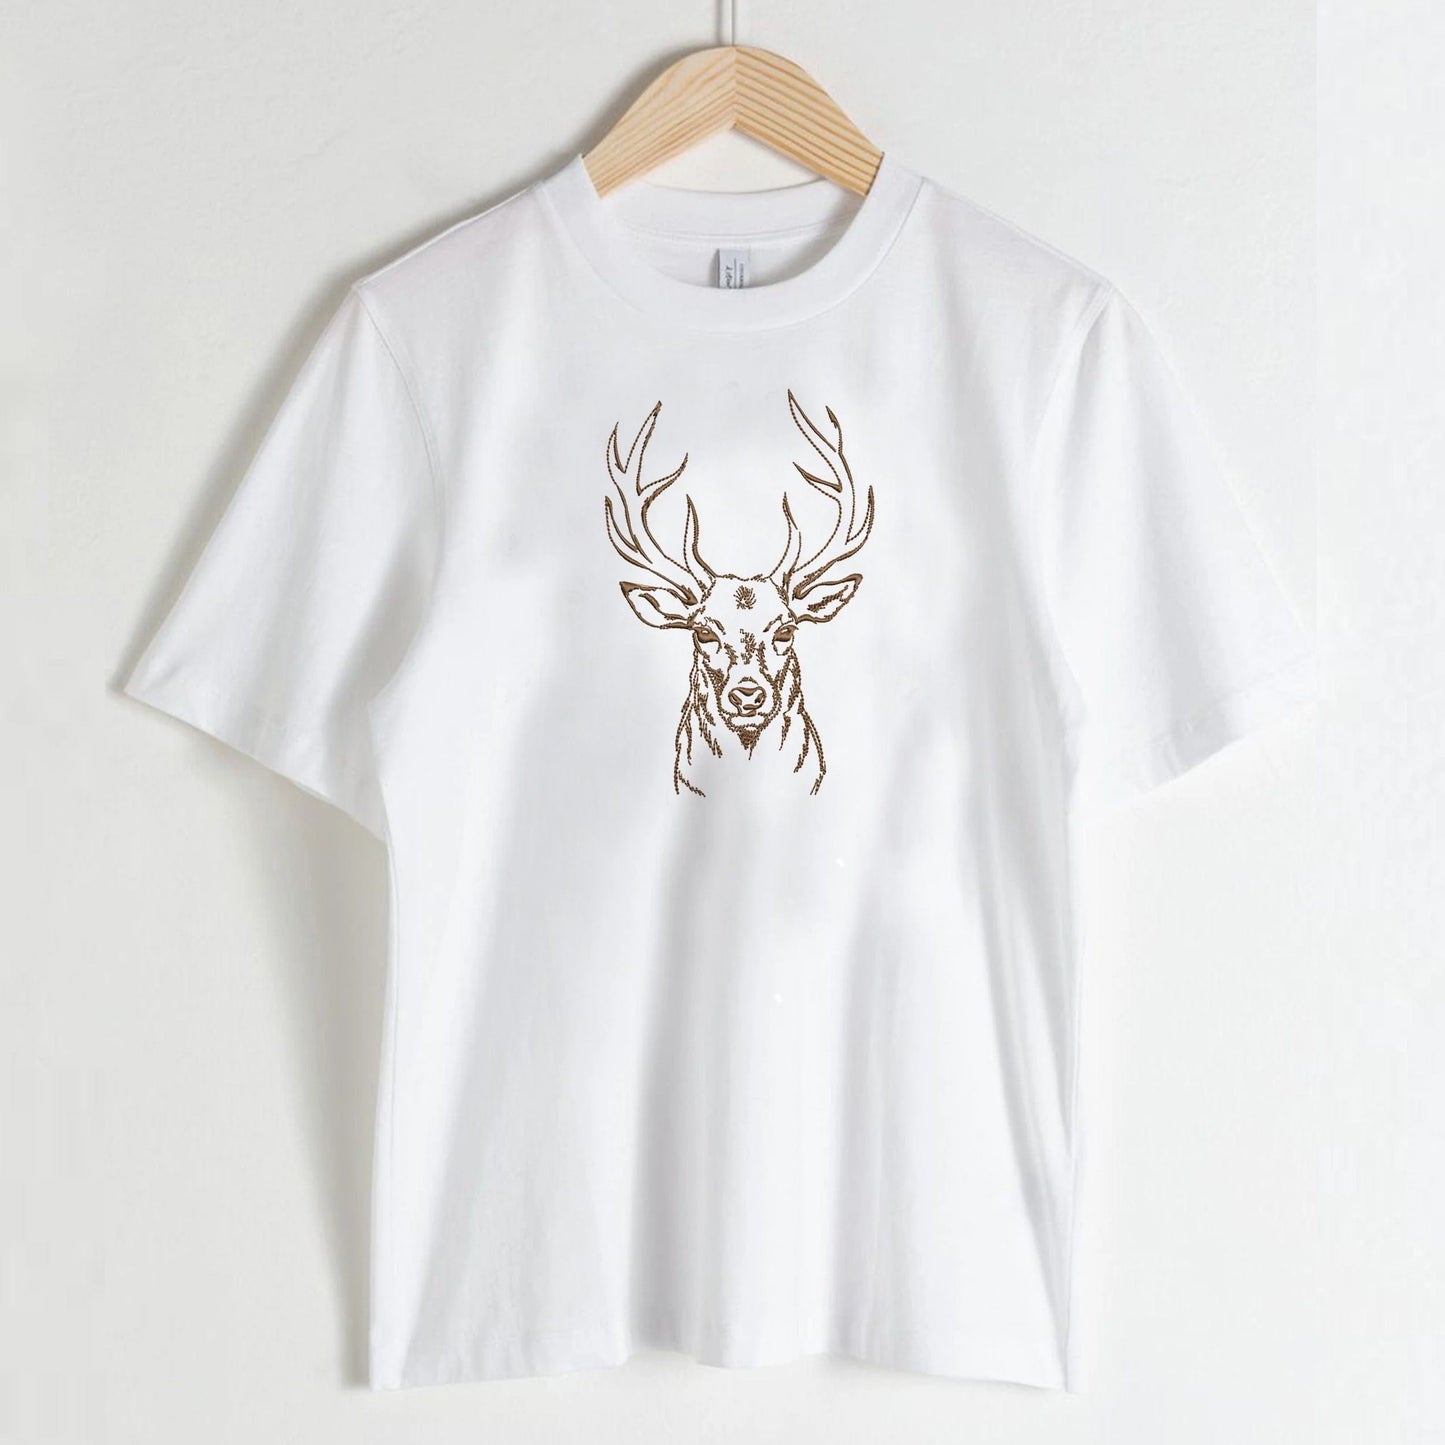 Deer Stag Machine Embroidery Design on t-shirt